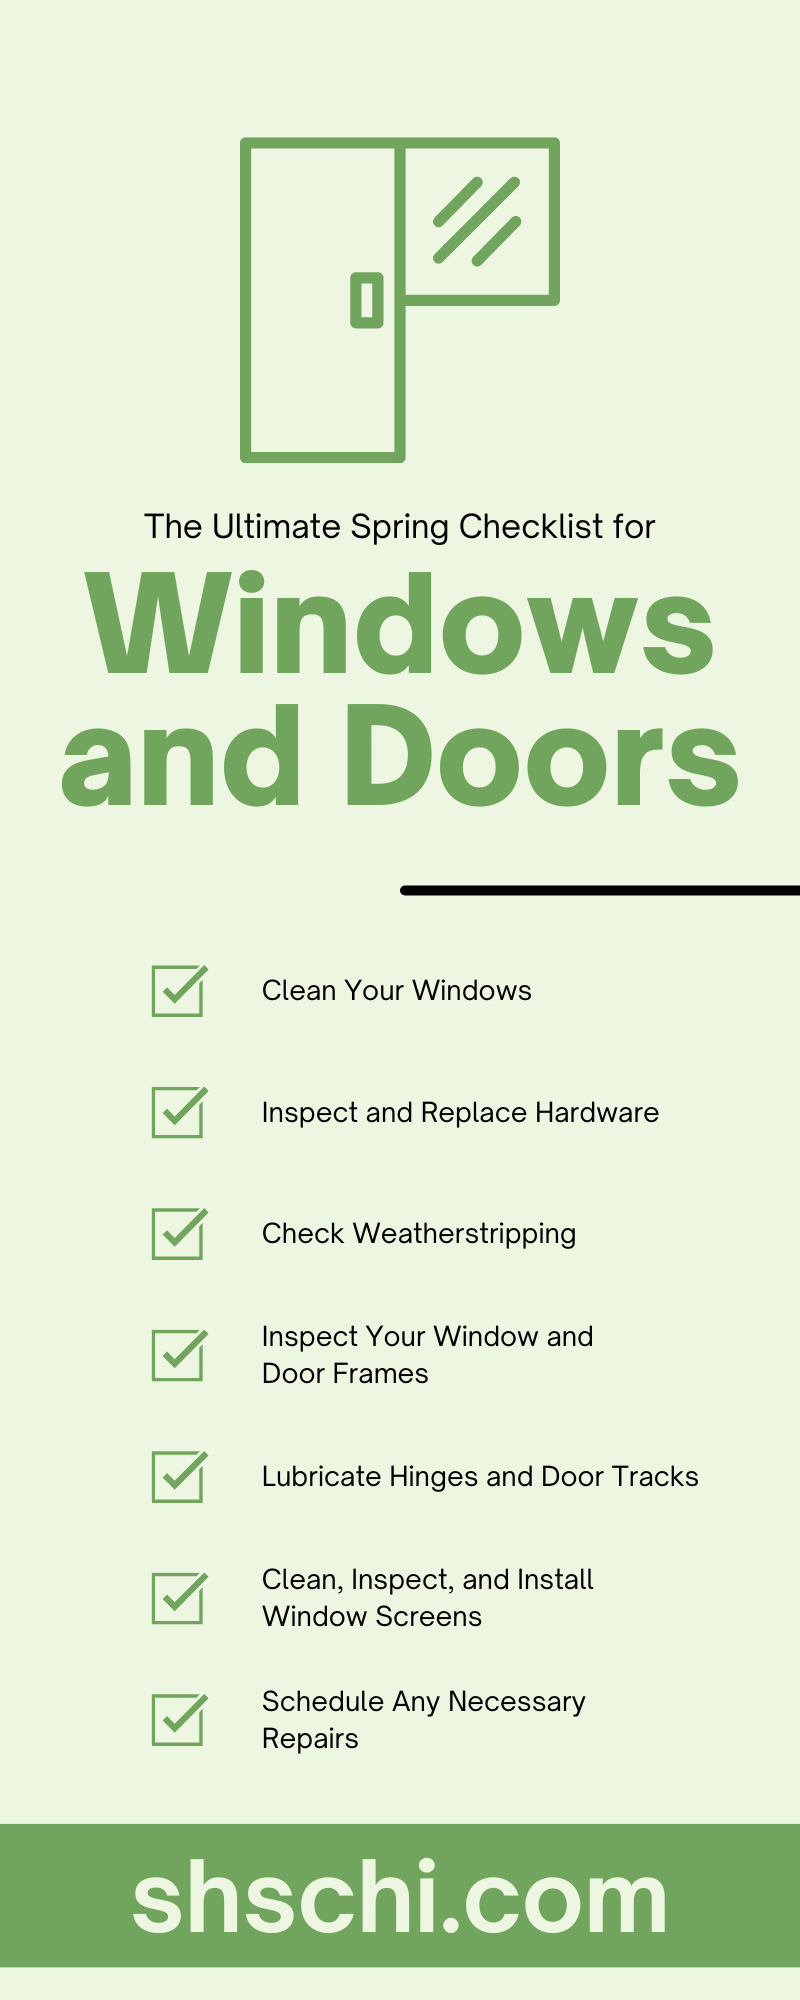 The Ultimate Spring Checklist for Windows and Doors